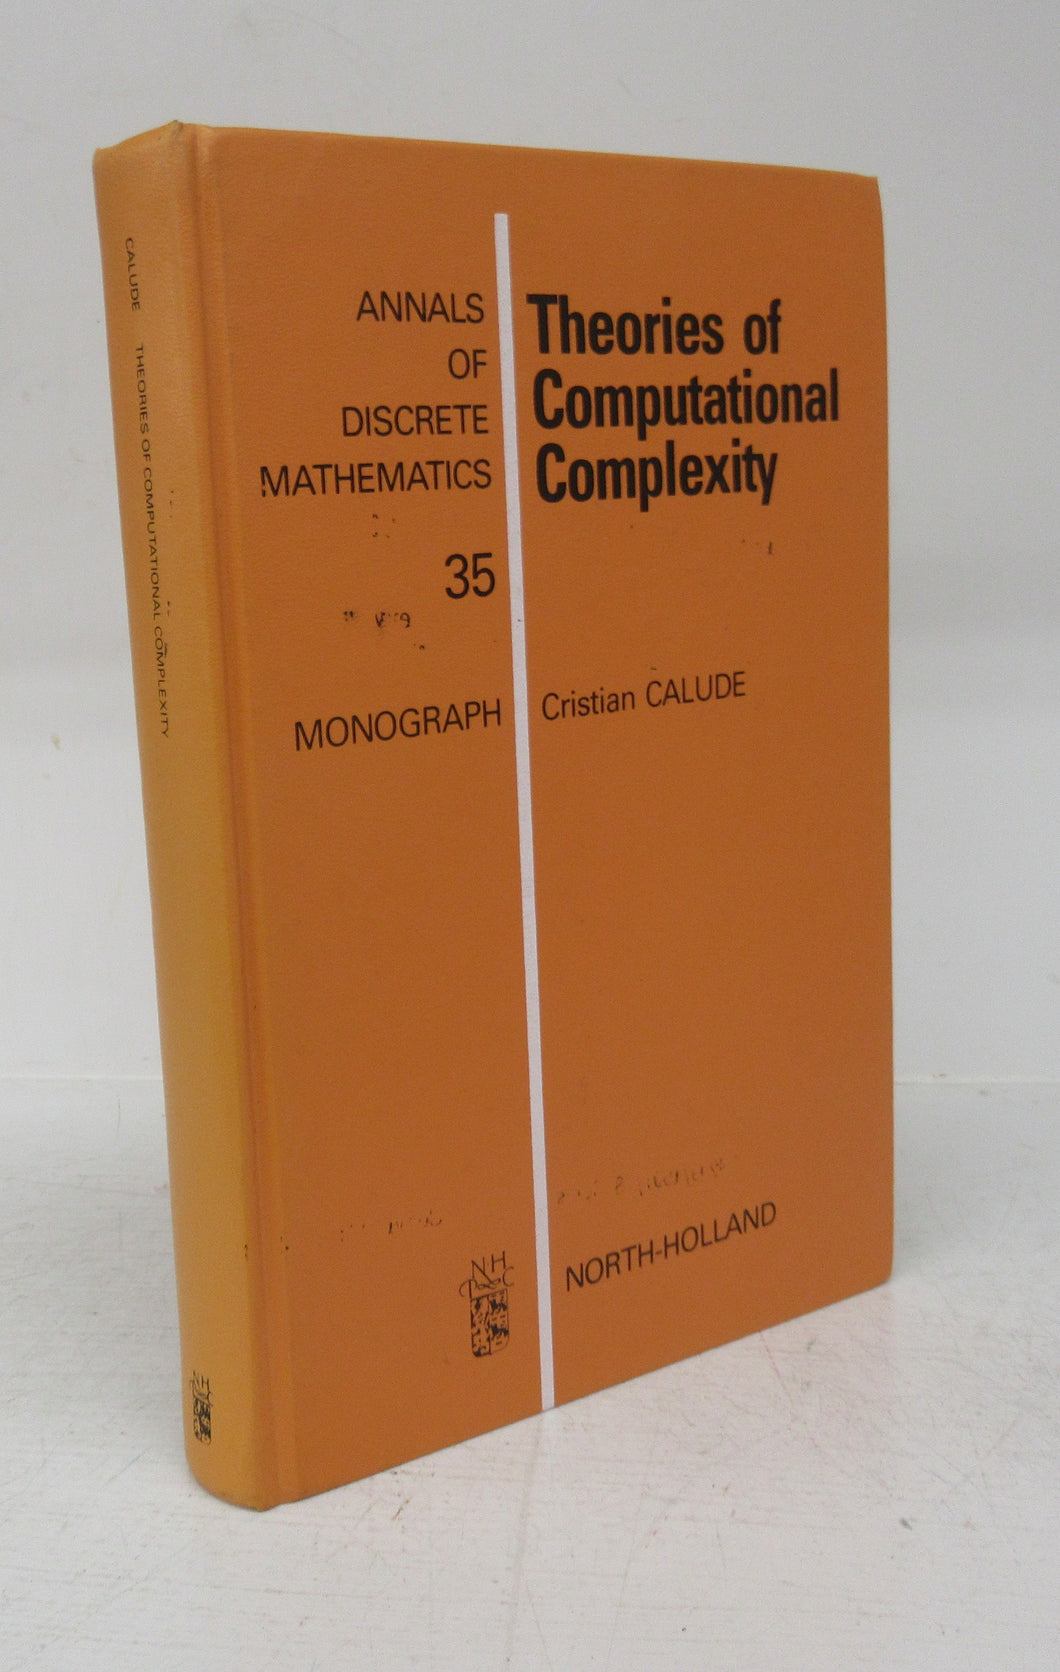 Theories of Computational Complexity